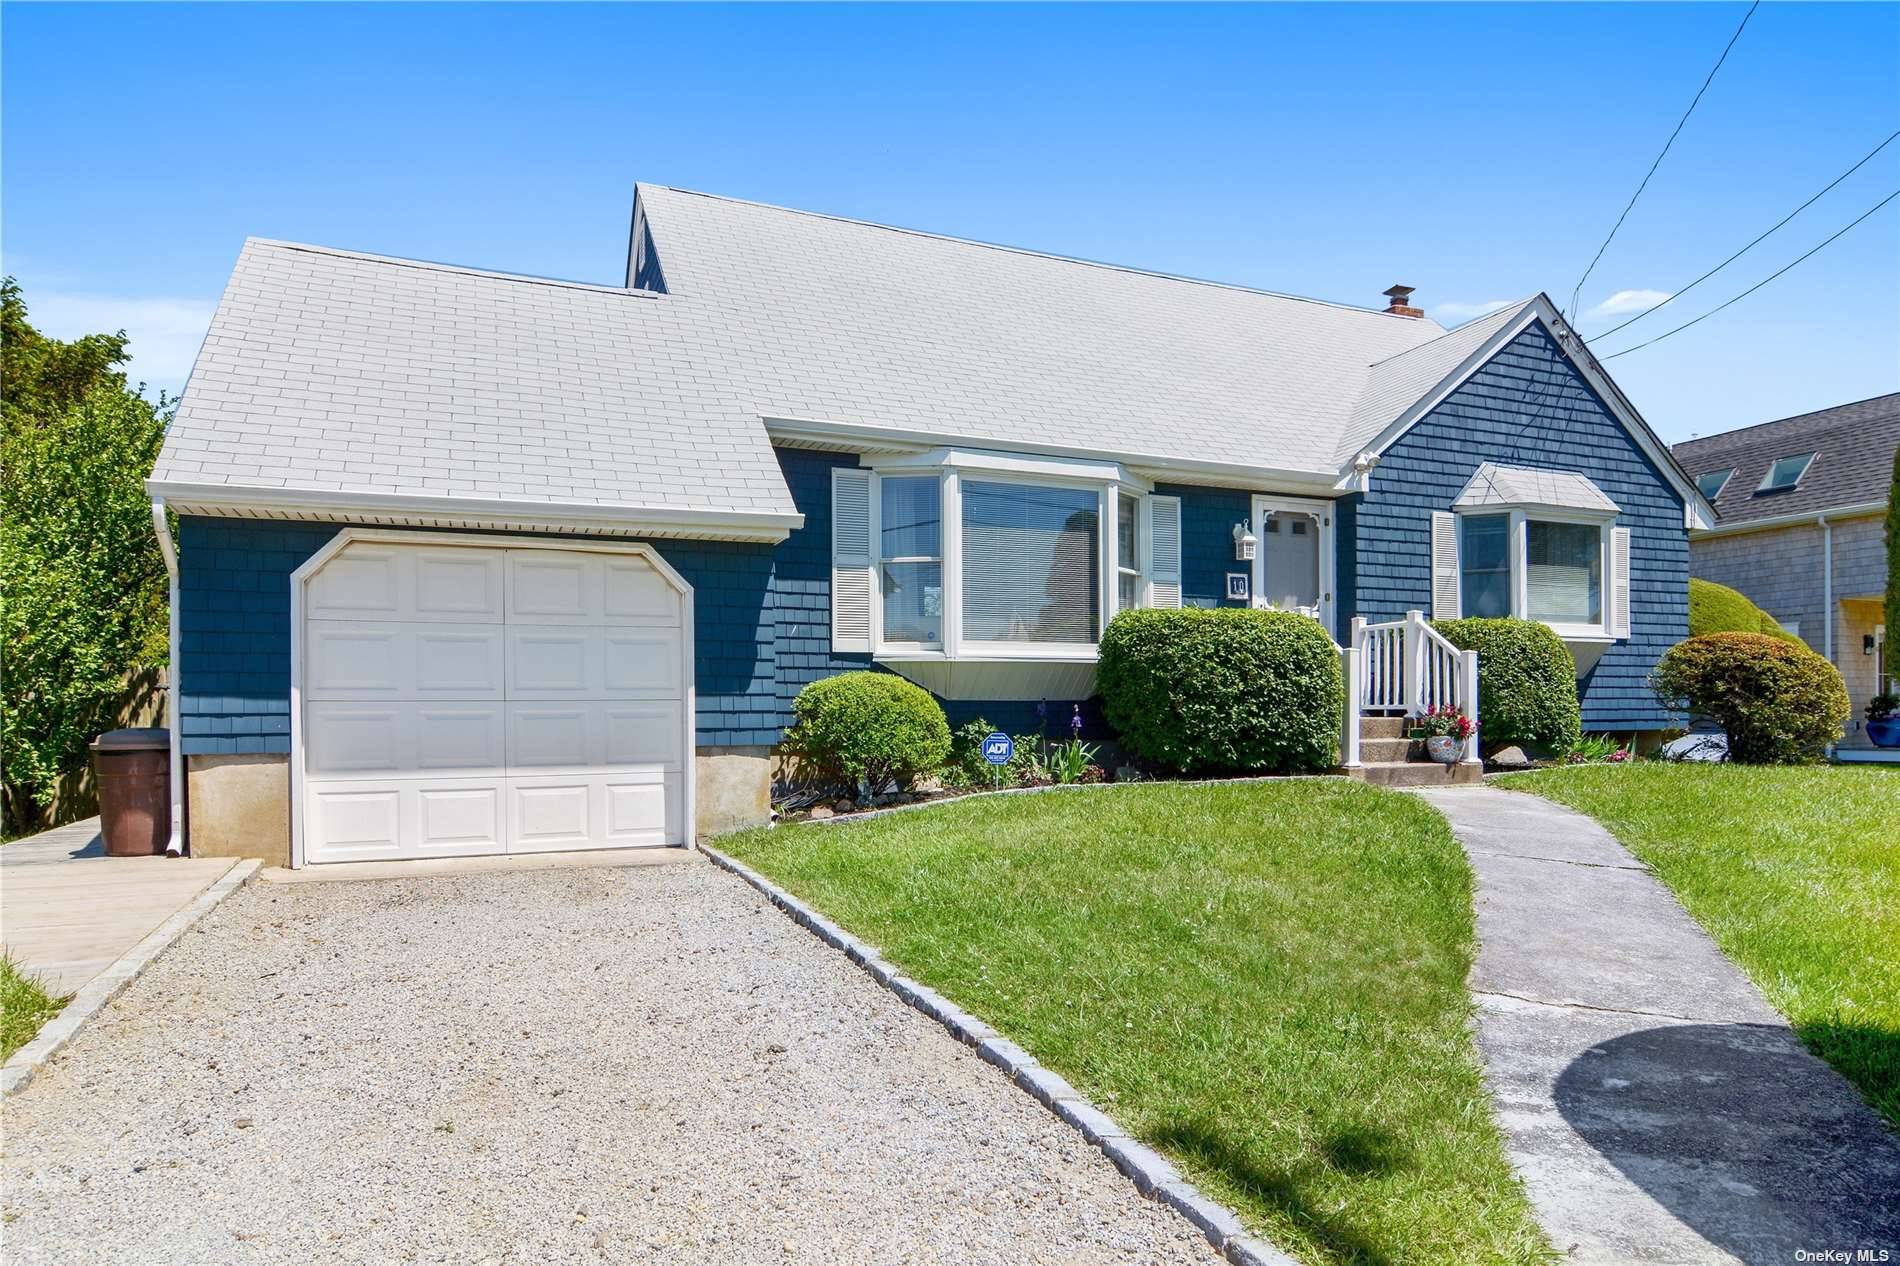 DITCH PLAINS LOCATION LOCATION LOCATION Located in the ever popular Ditch Plains of Montauk and close to ocean beach is this four bedroom, two bath home with additional den sitting ...